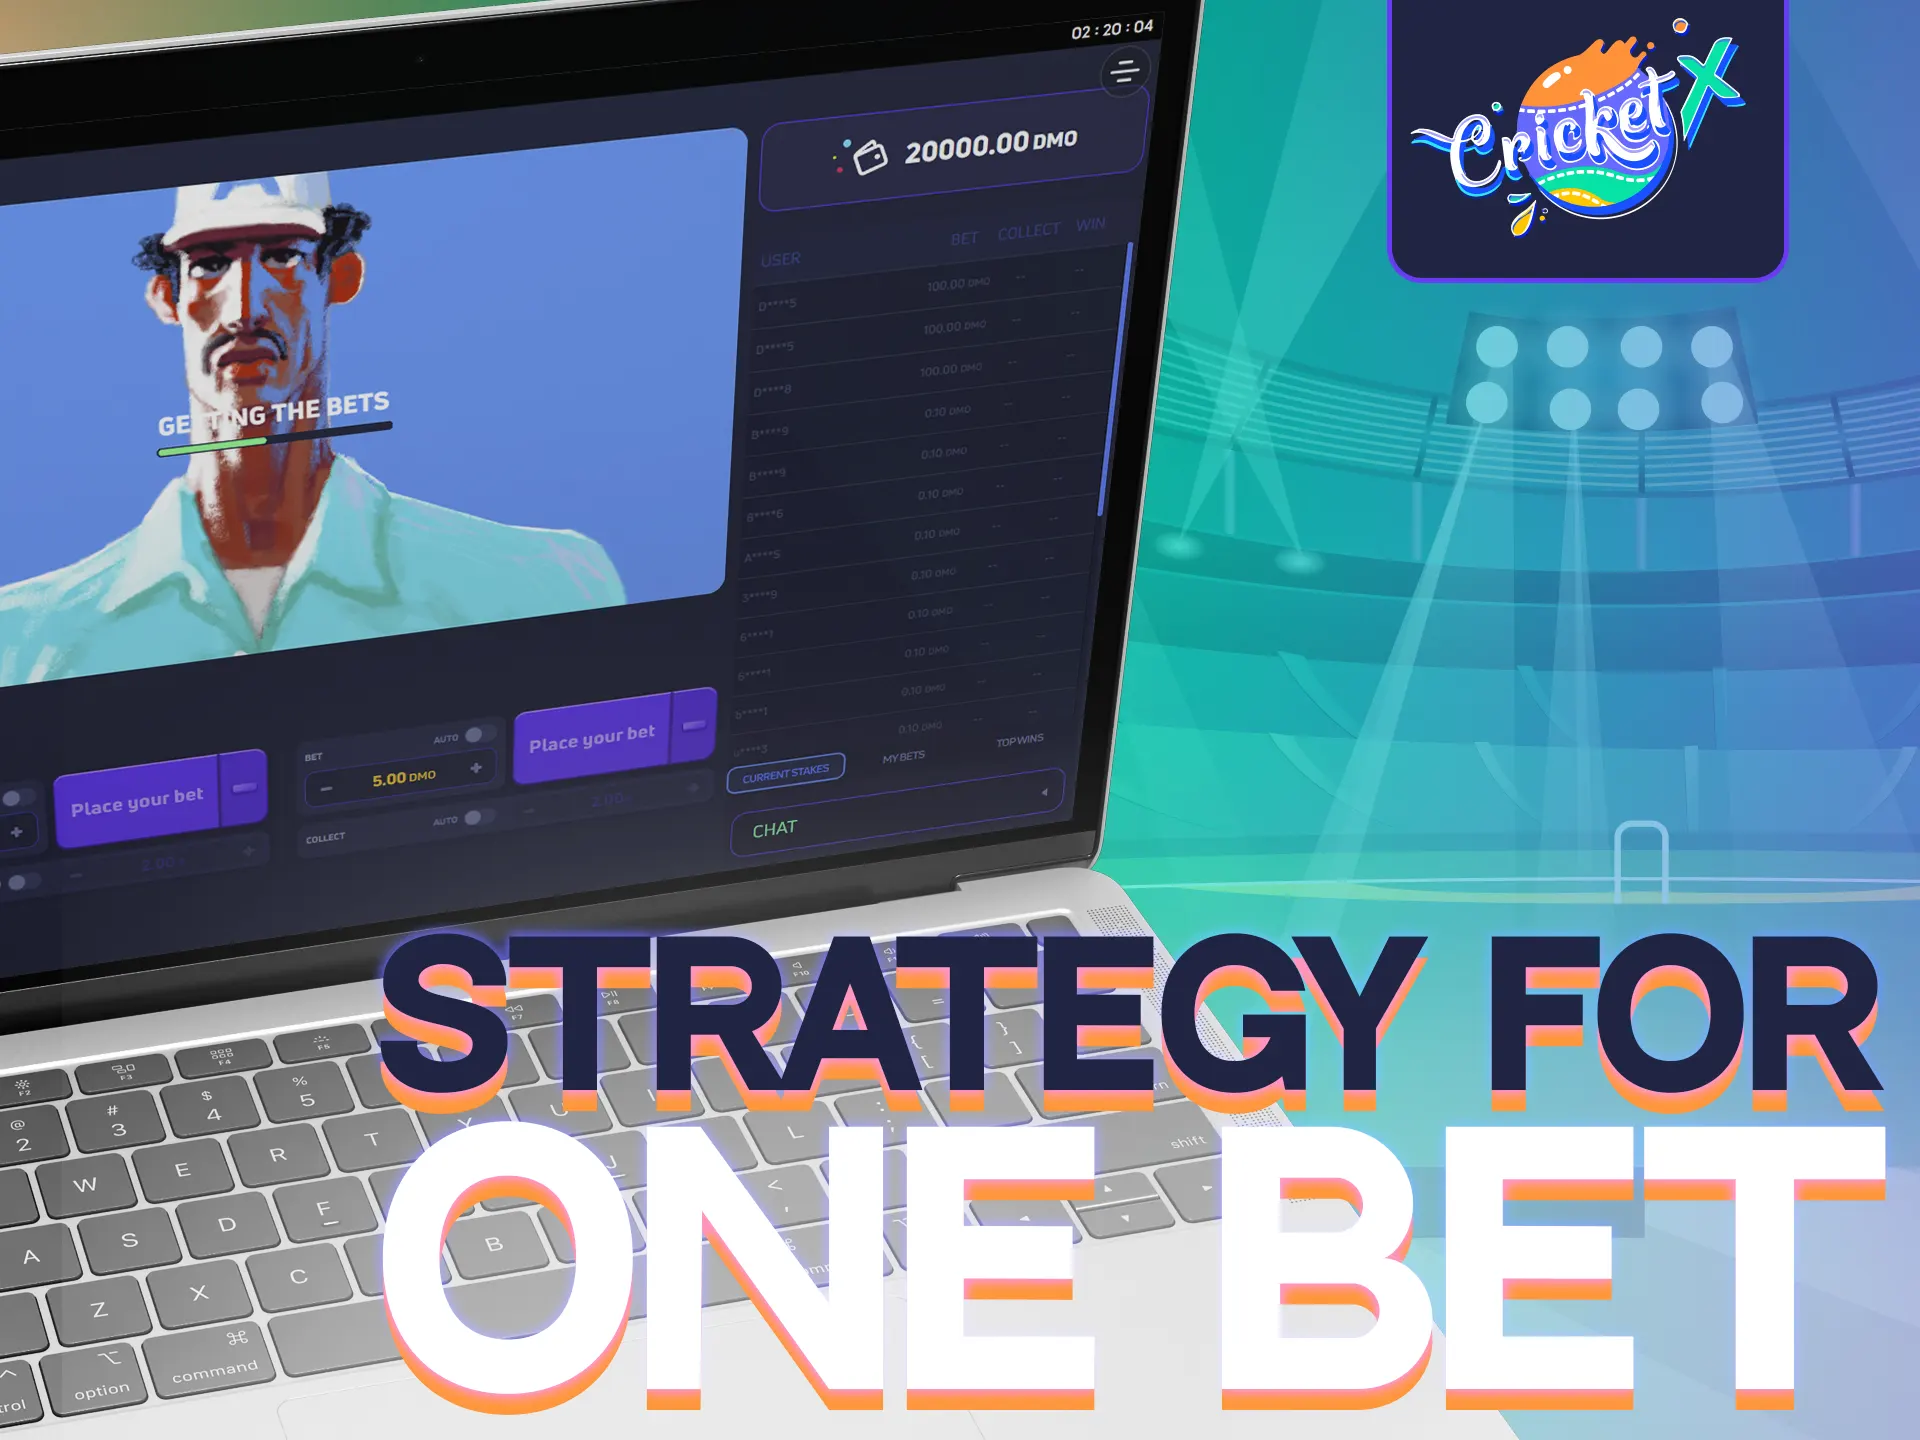 Use strategy for one bet to increase your winnings in Cricket-X.